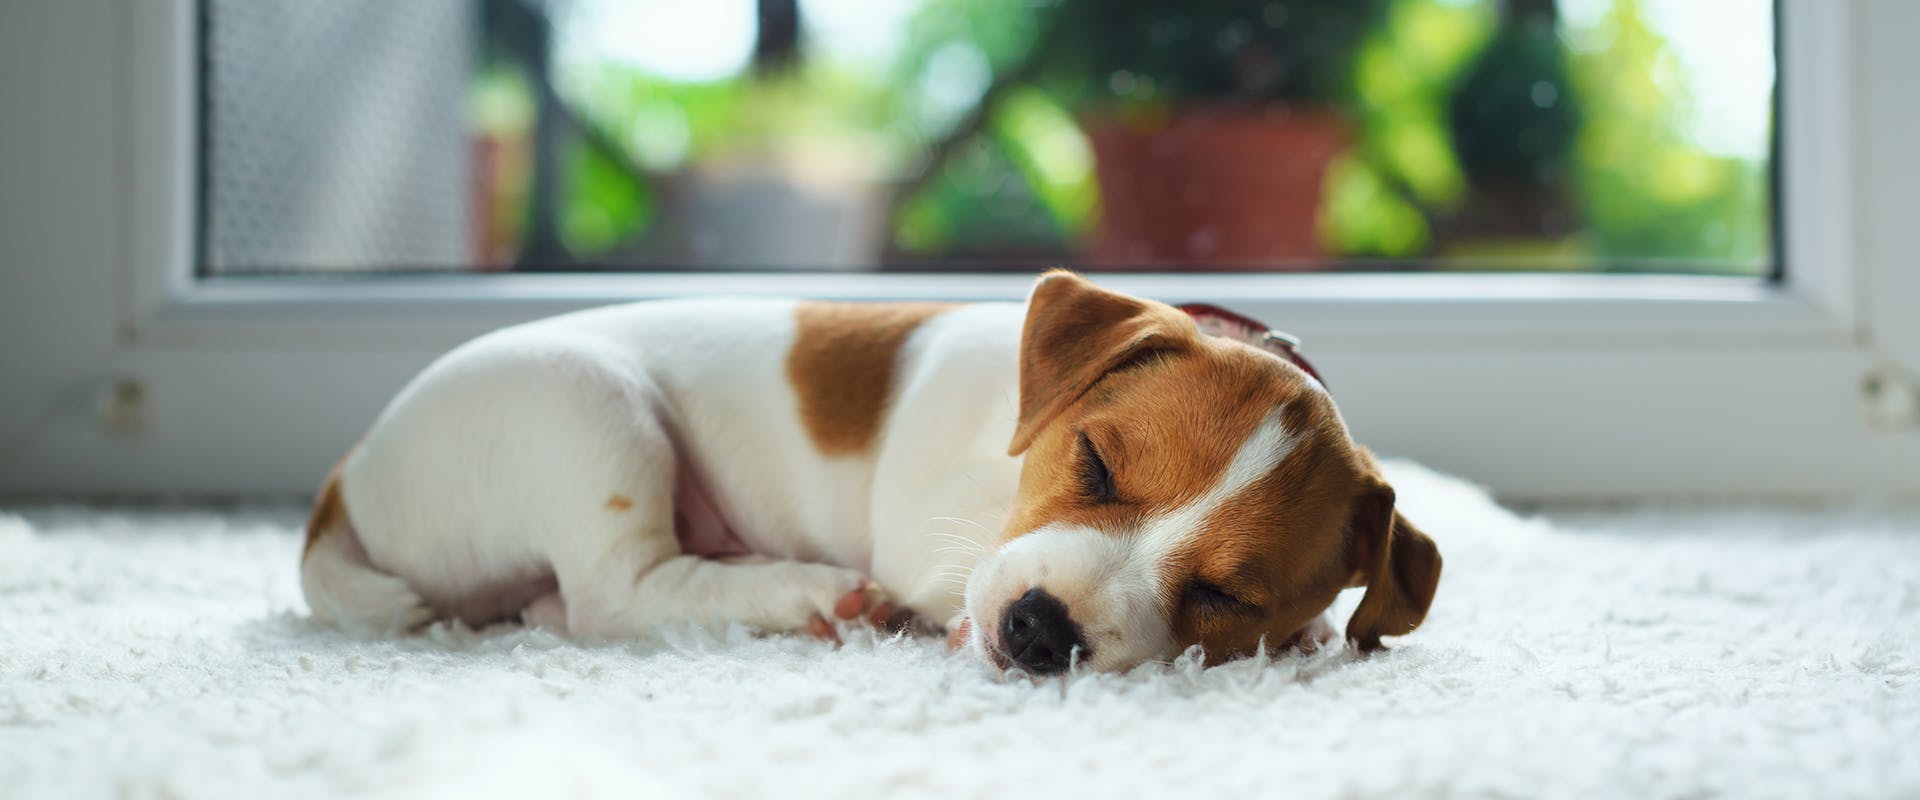 A cute Jack Russell puppy sleeping peacefully on a fluffy white rug